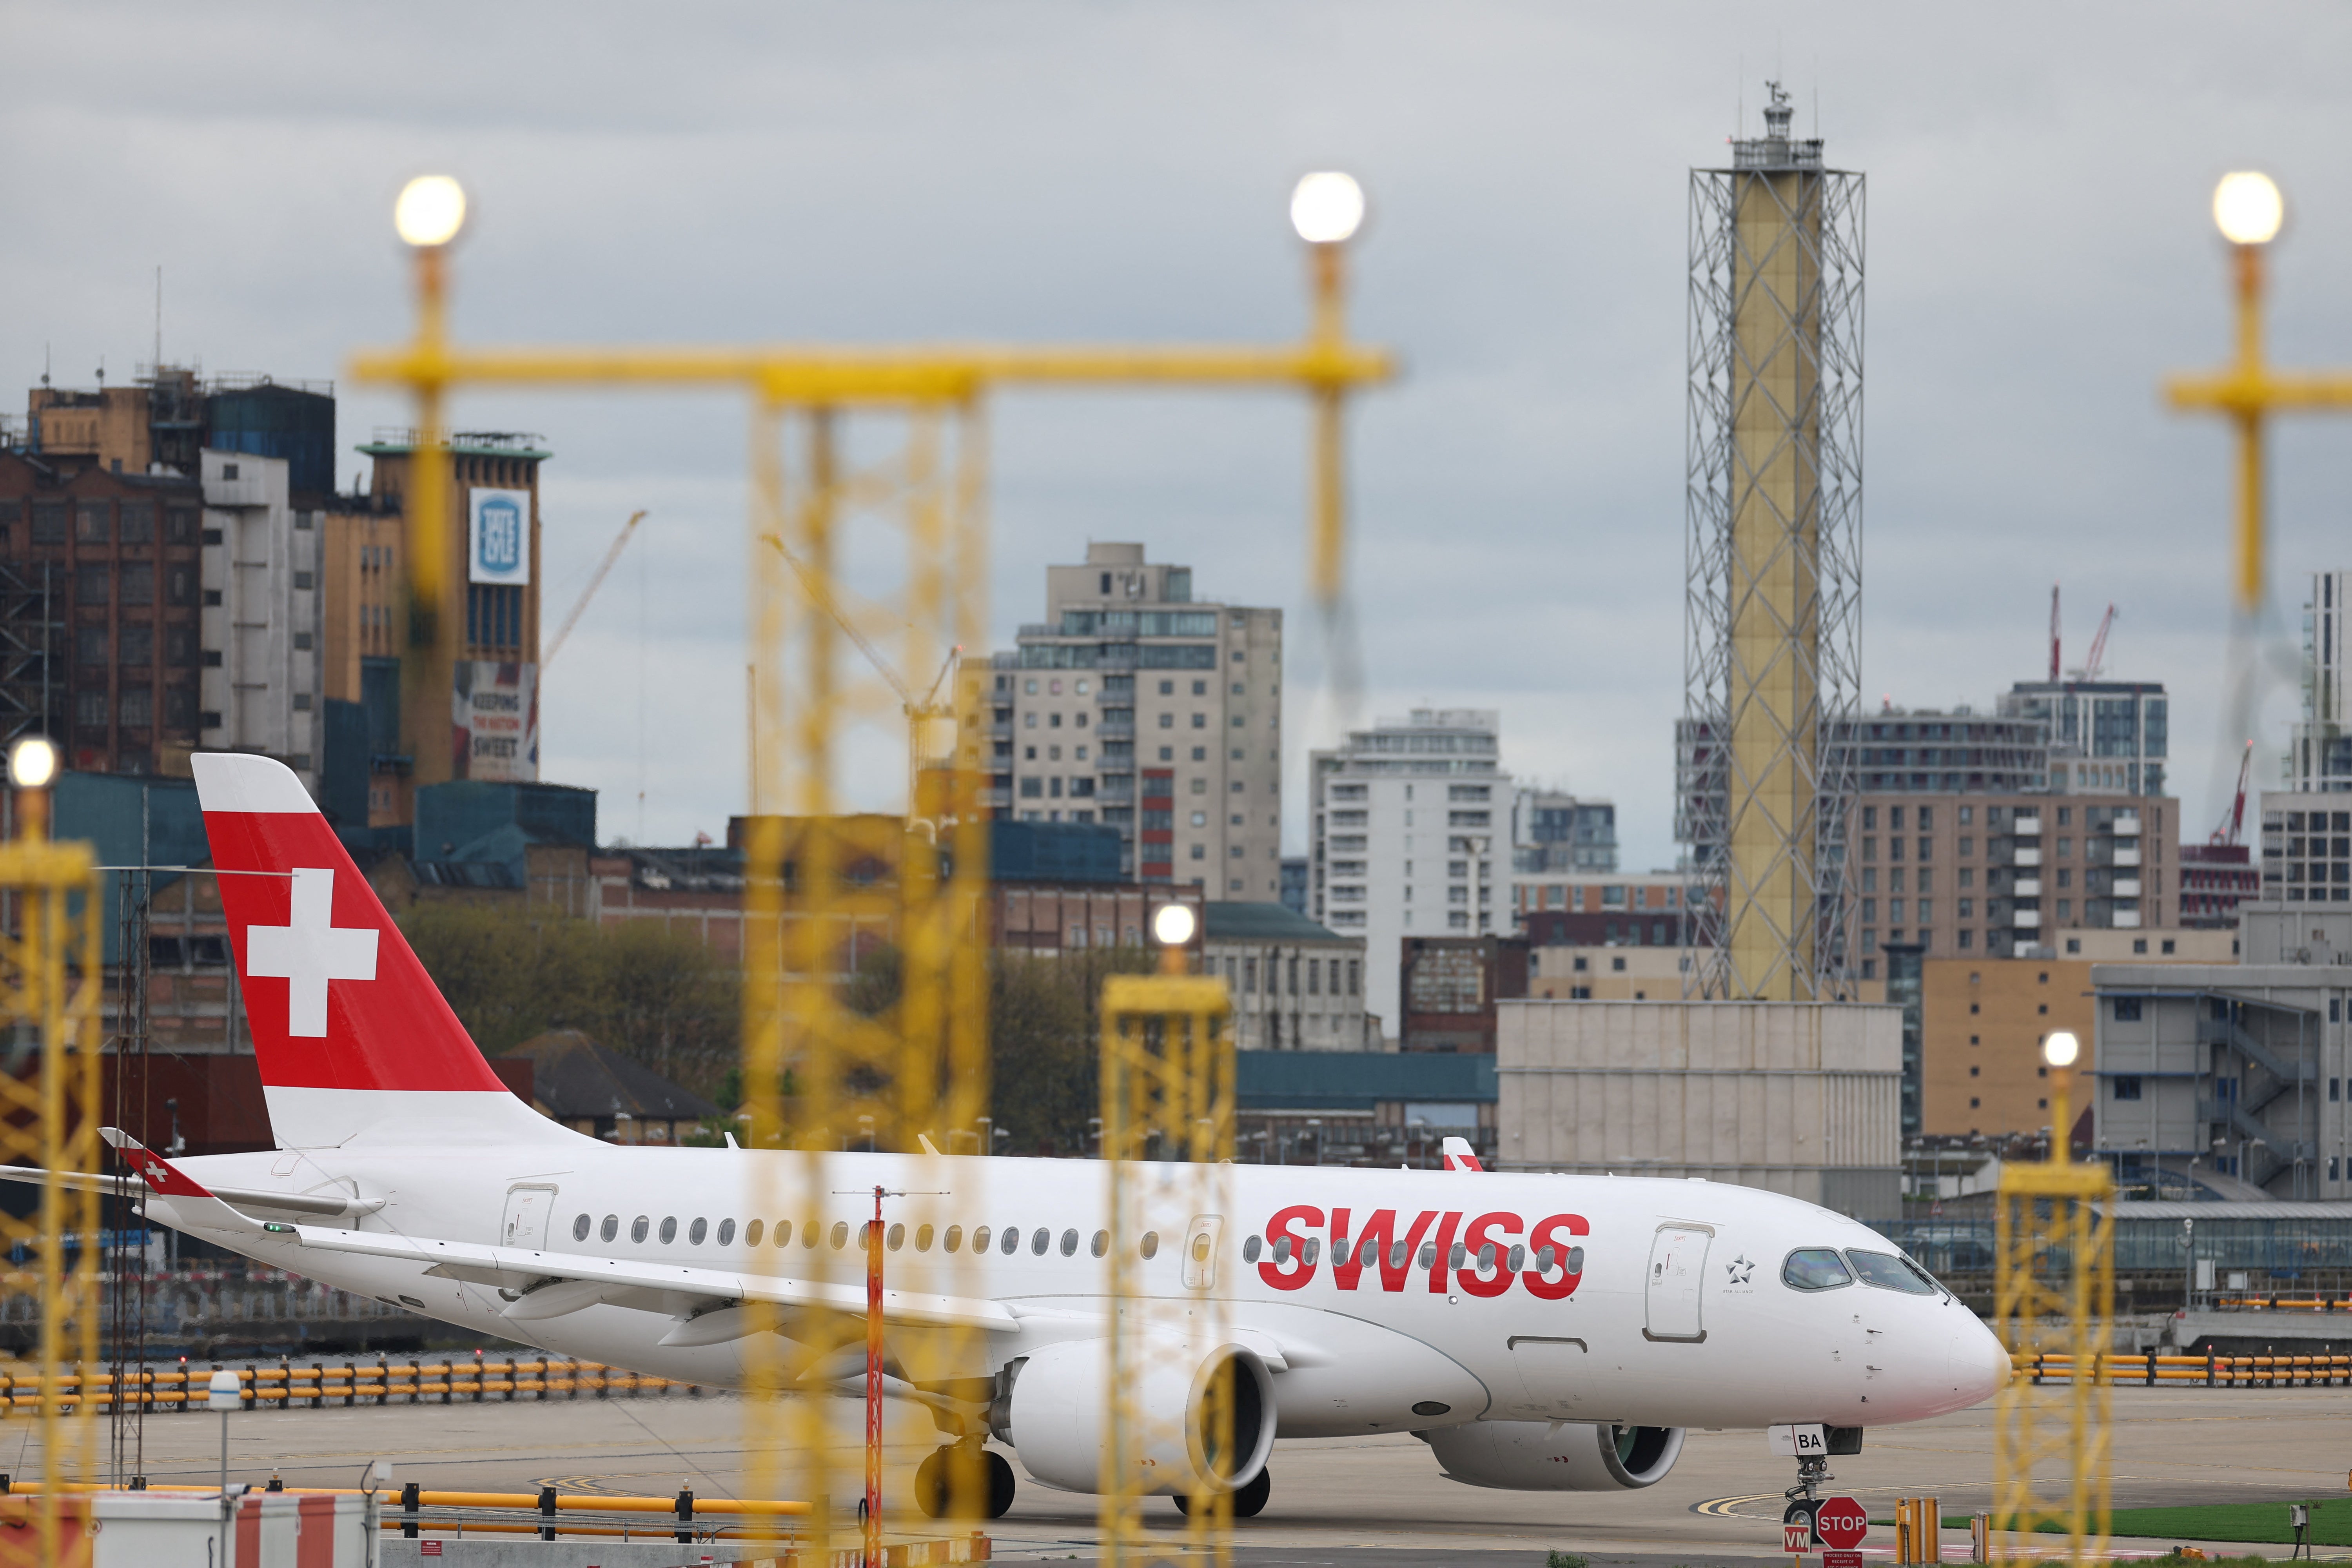 A Swiss Air aircraft pictured in London on 11 April. A pilot for Swiss Airways recently averted a four-plane collision at JFK International Airport